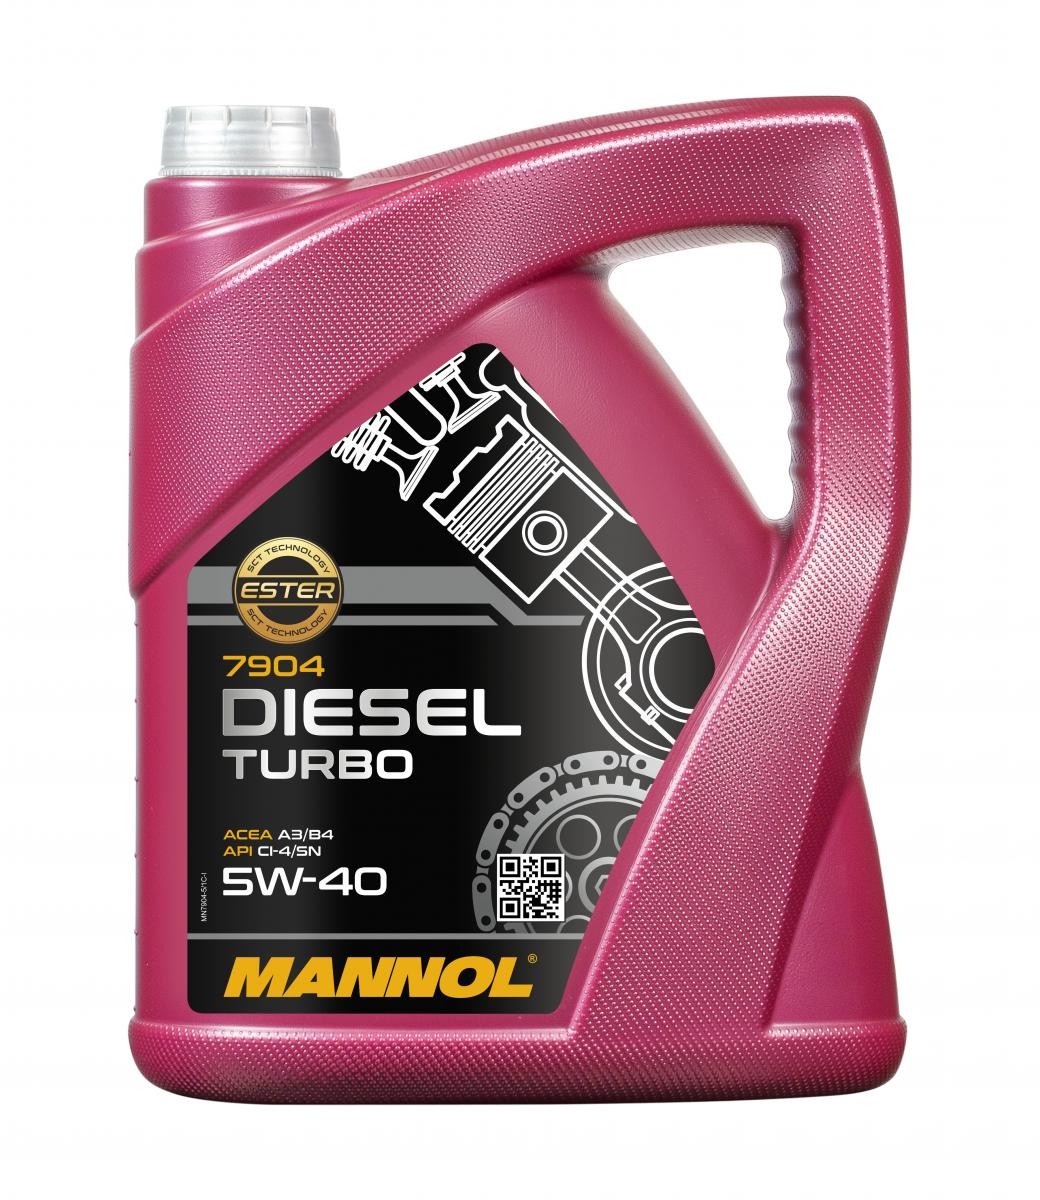 MANNOL DIESEL TURBO MN7904-5 Engine oil 5W-40, 5l, Synthetic Oil